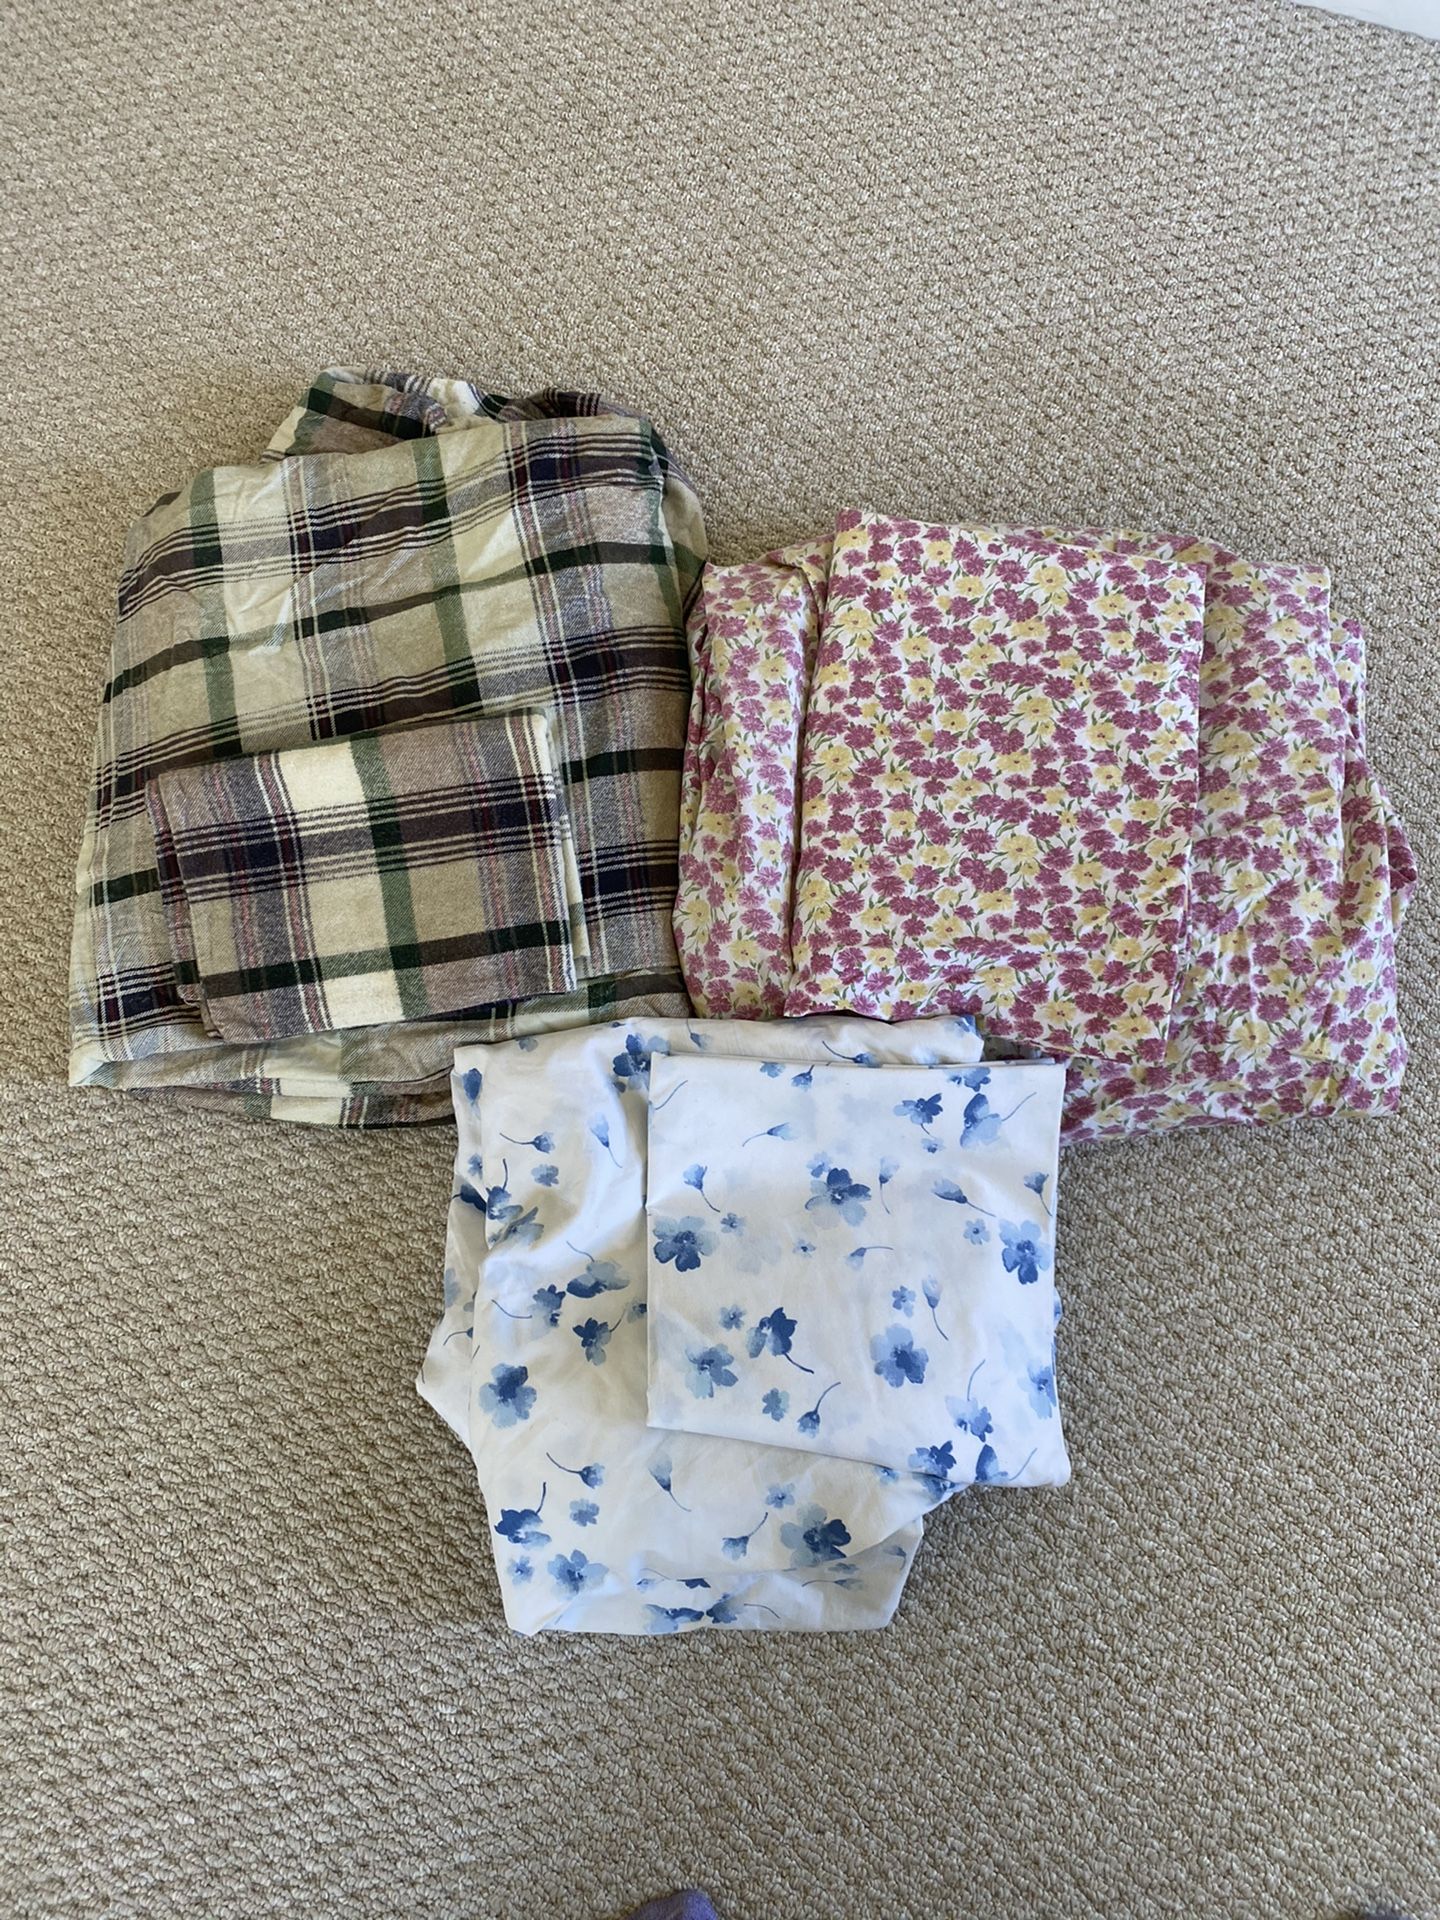 3 twin and full fitted sheets with pillow case